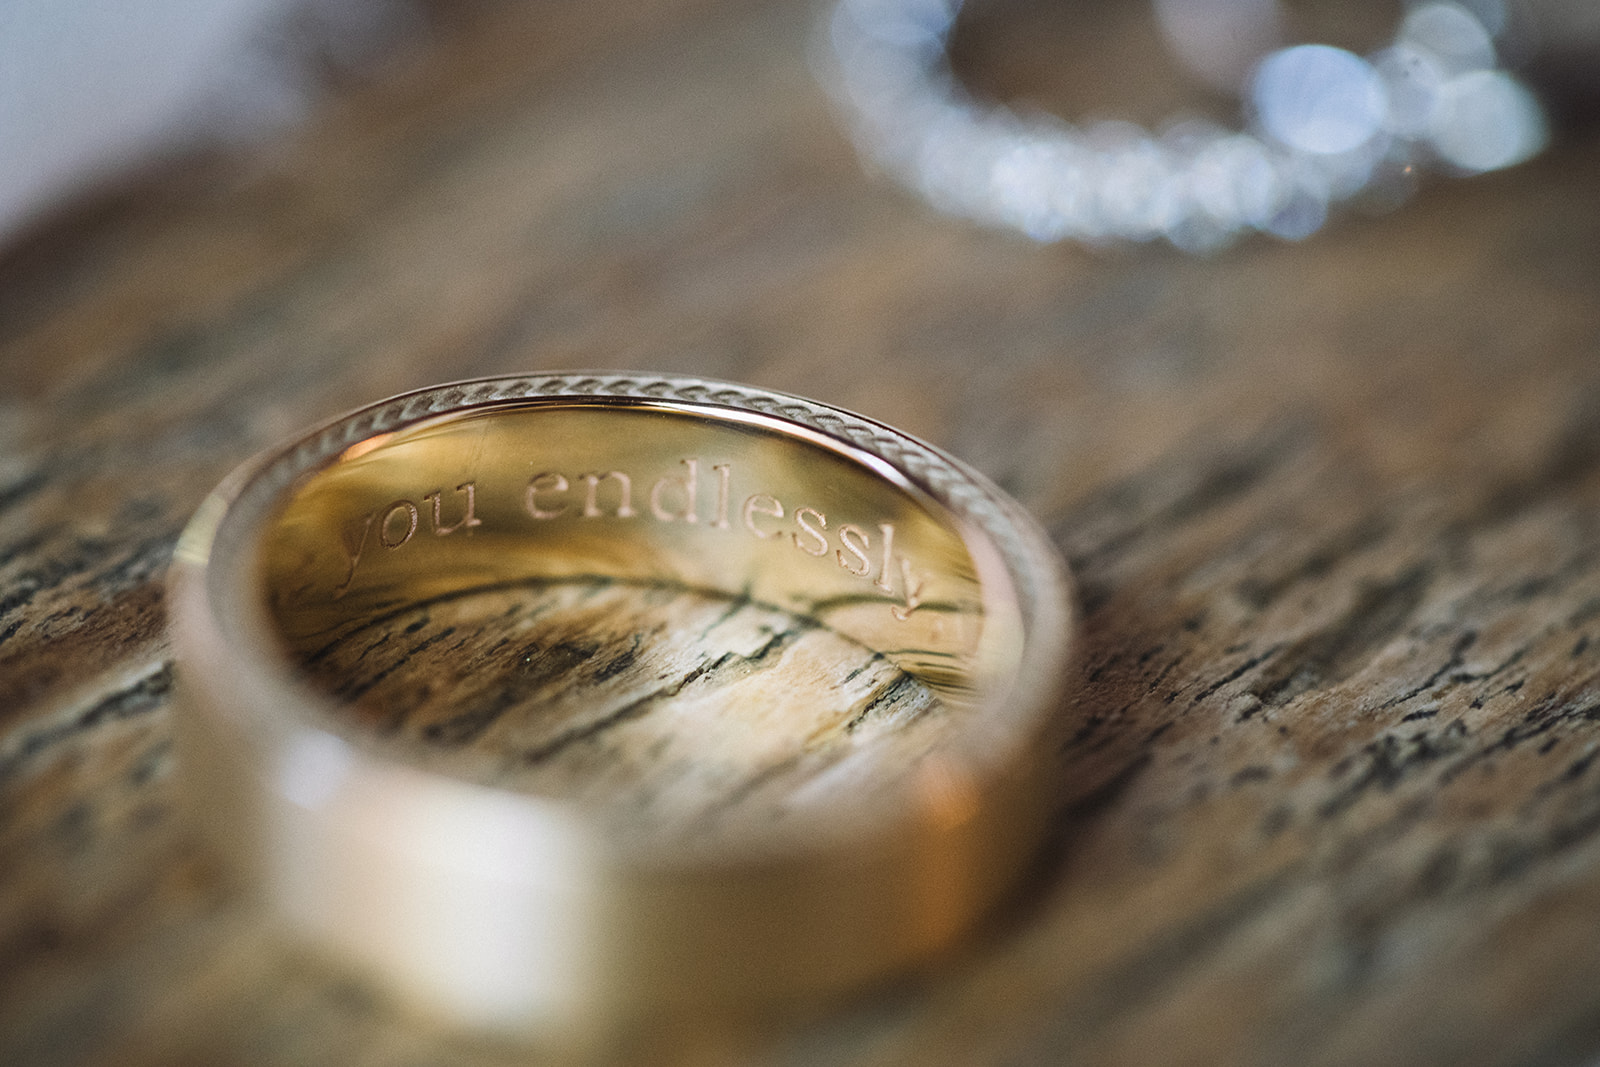 grooms wedding band inscribed with personal touch